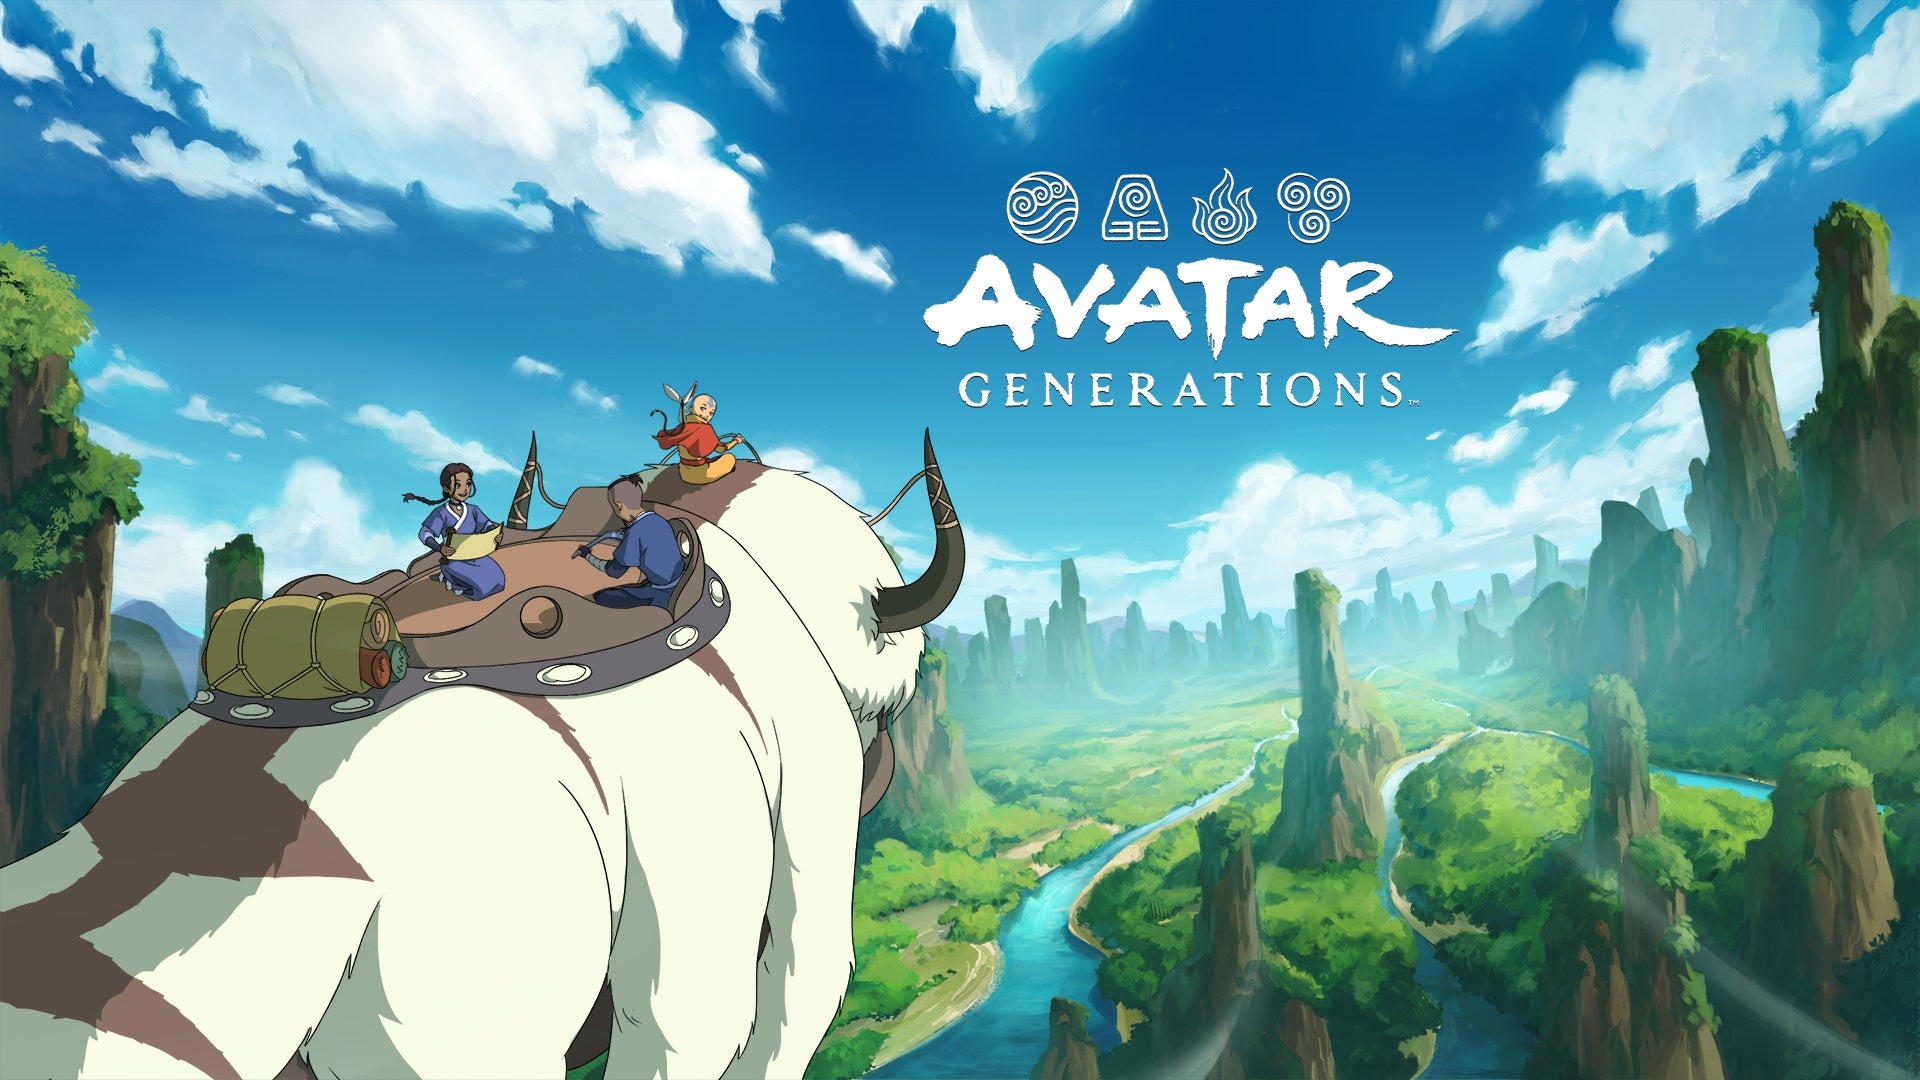 Avatar The Last Airbender video game  Wikipedia